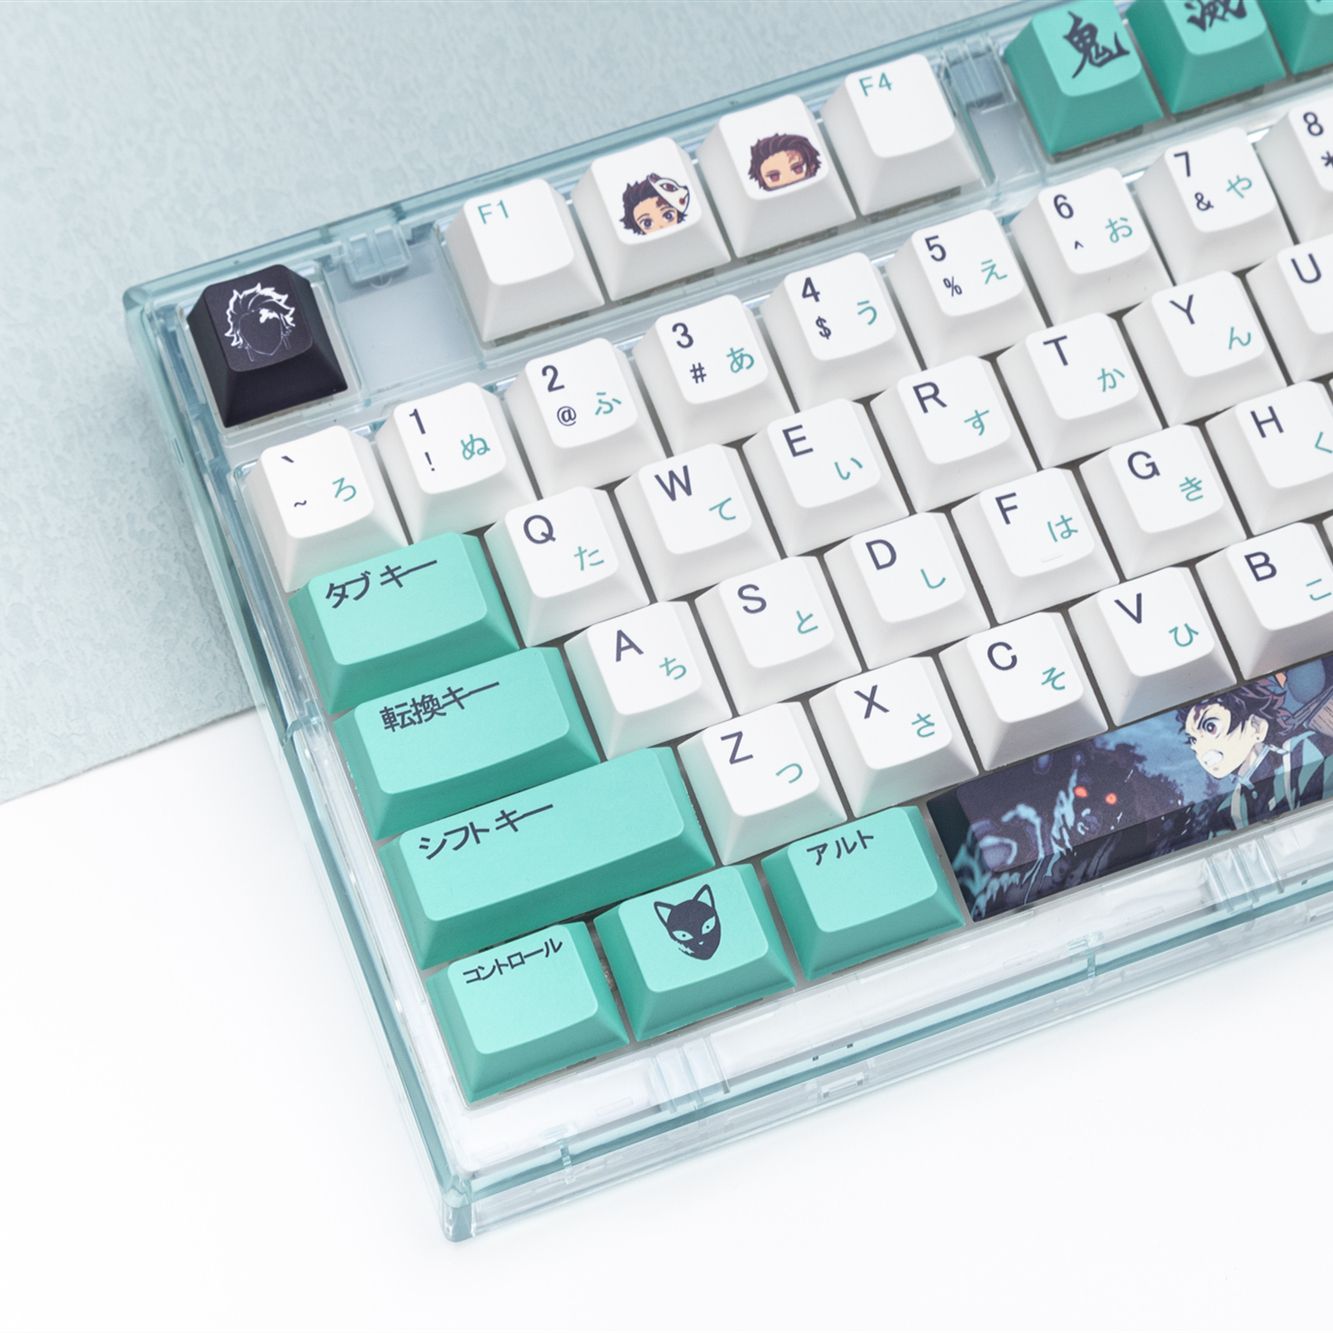 Anime Keycaps - Official Aniem Keycaps Store